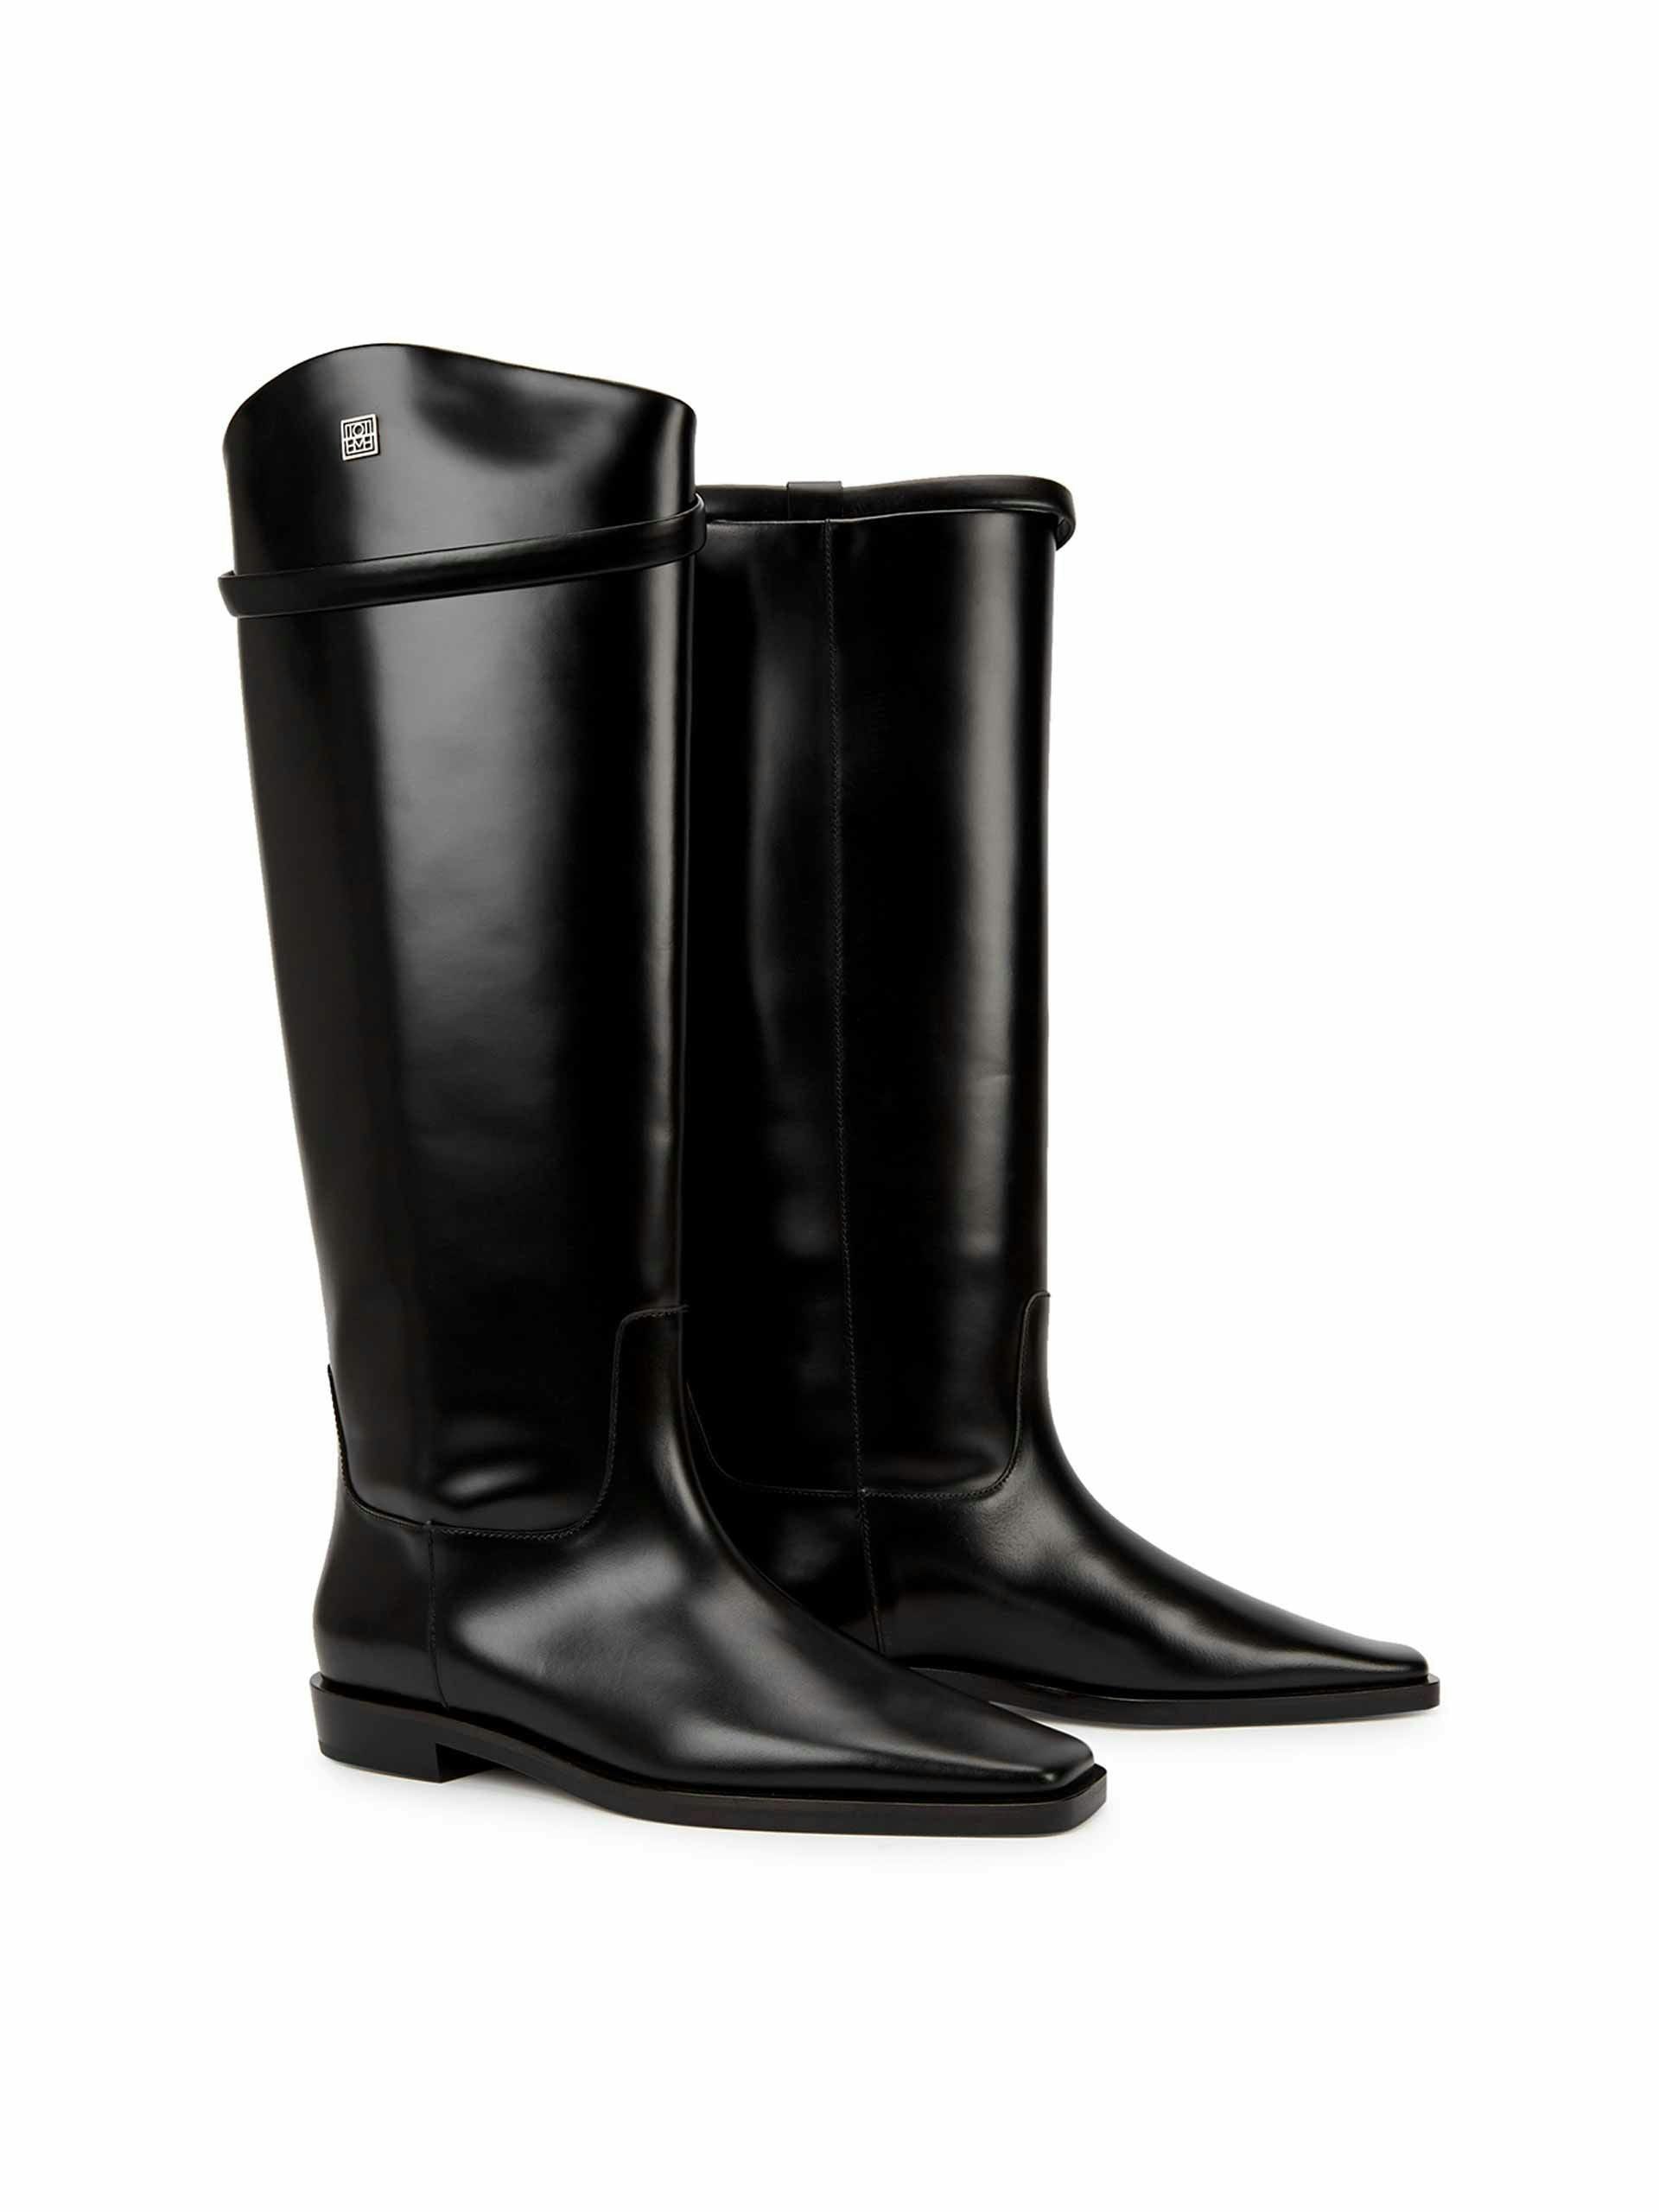 The Riding black leather knee-high boots